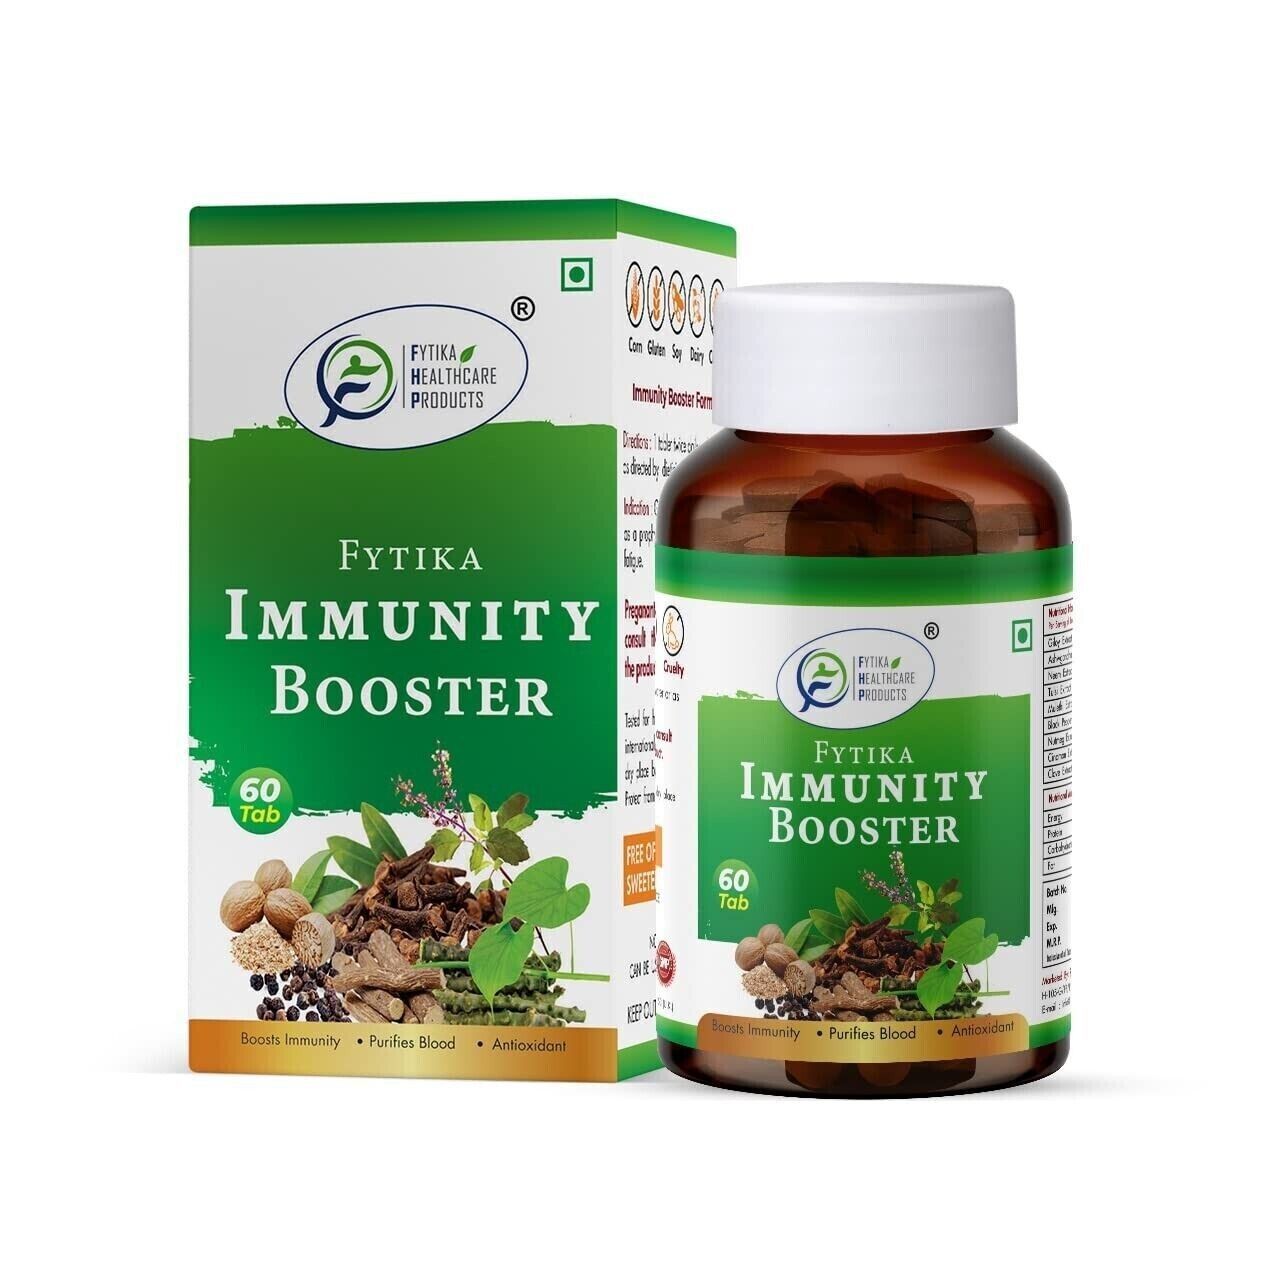 FYTIKA Natural Supplement To Boost Immune System 60Tablets For Adults - $22.50